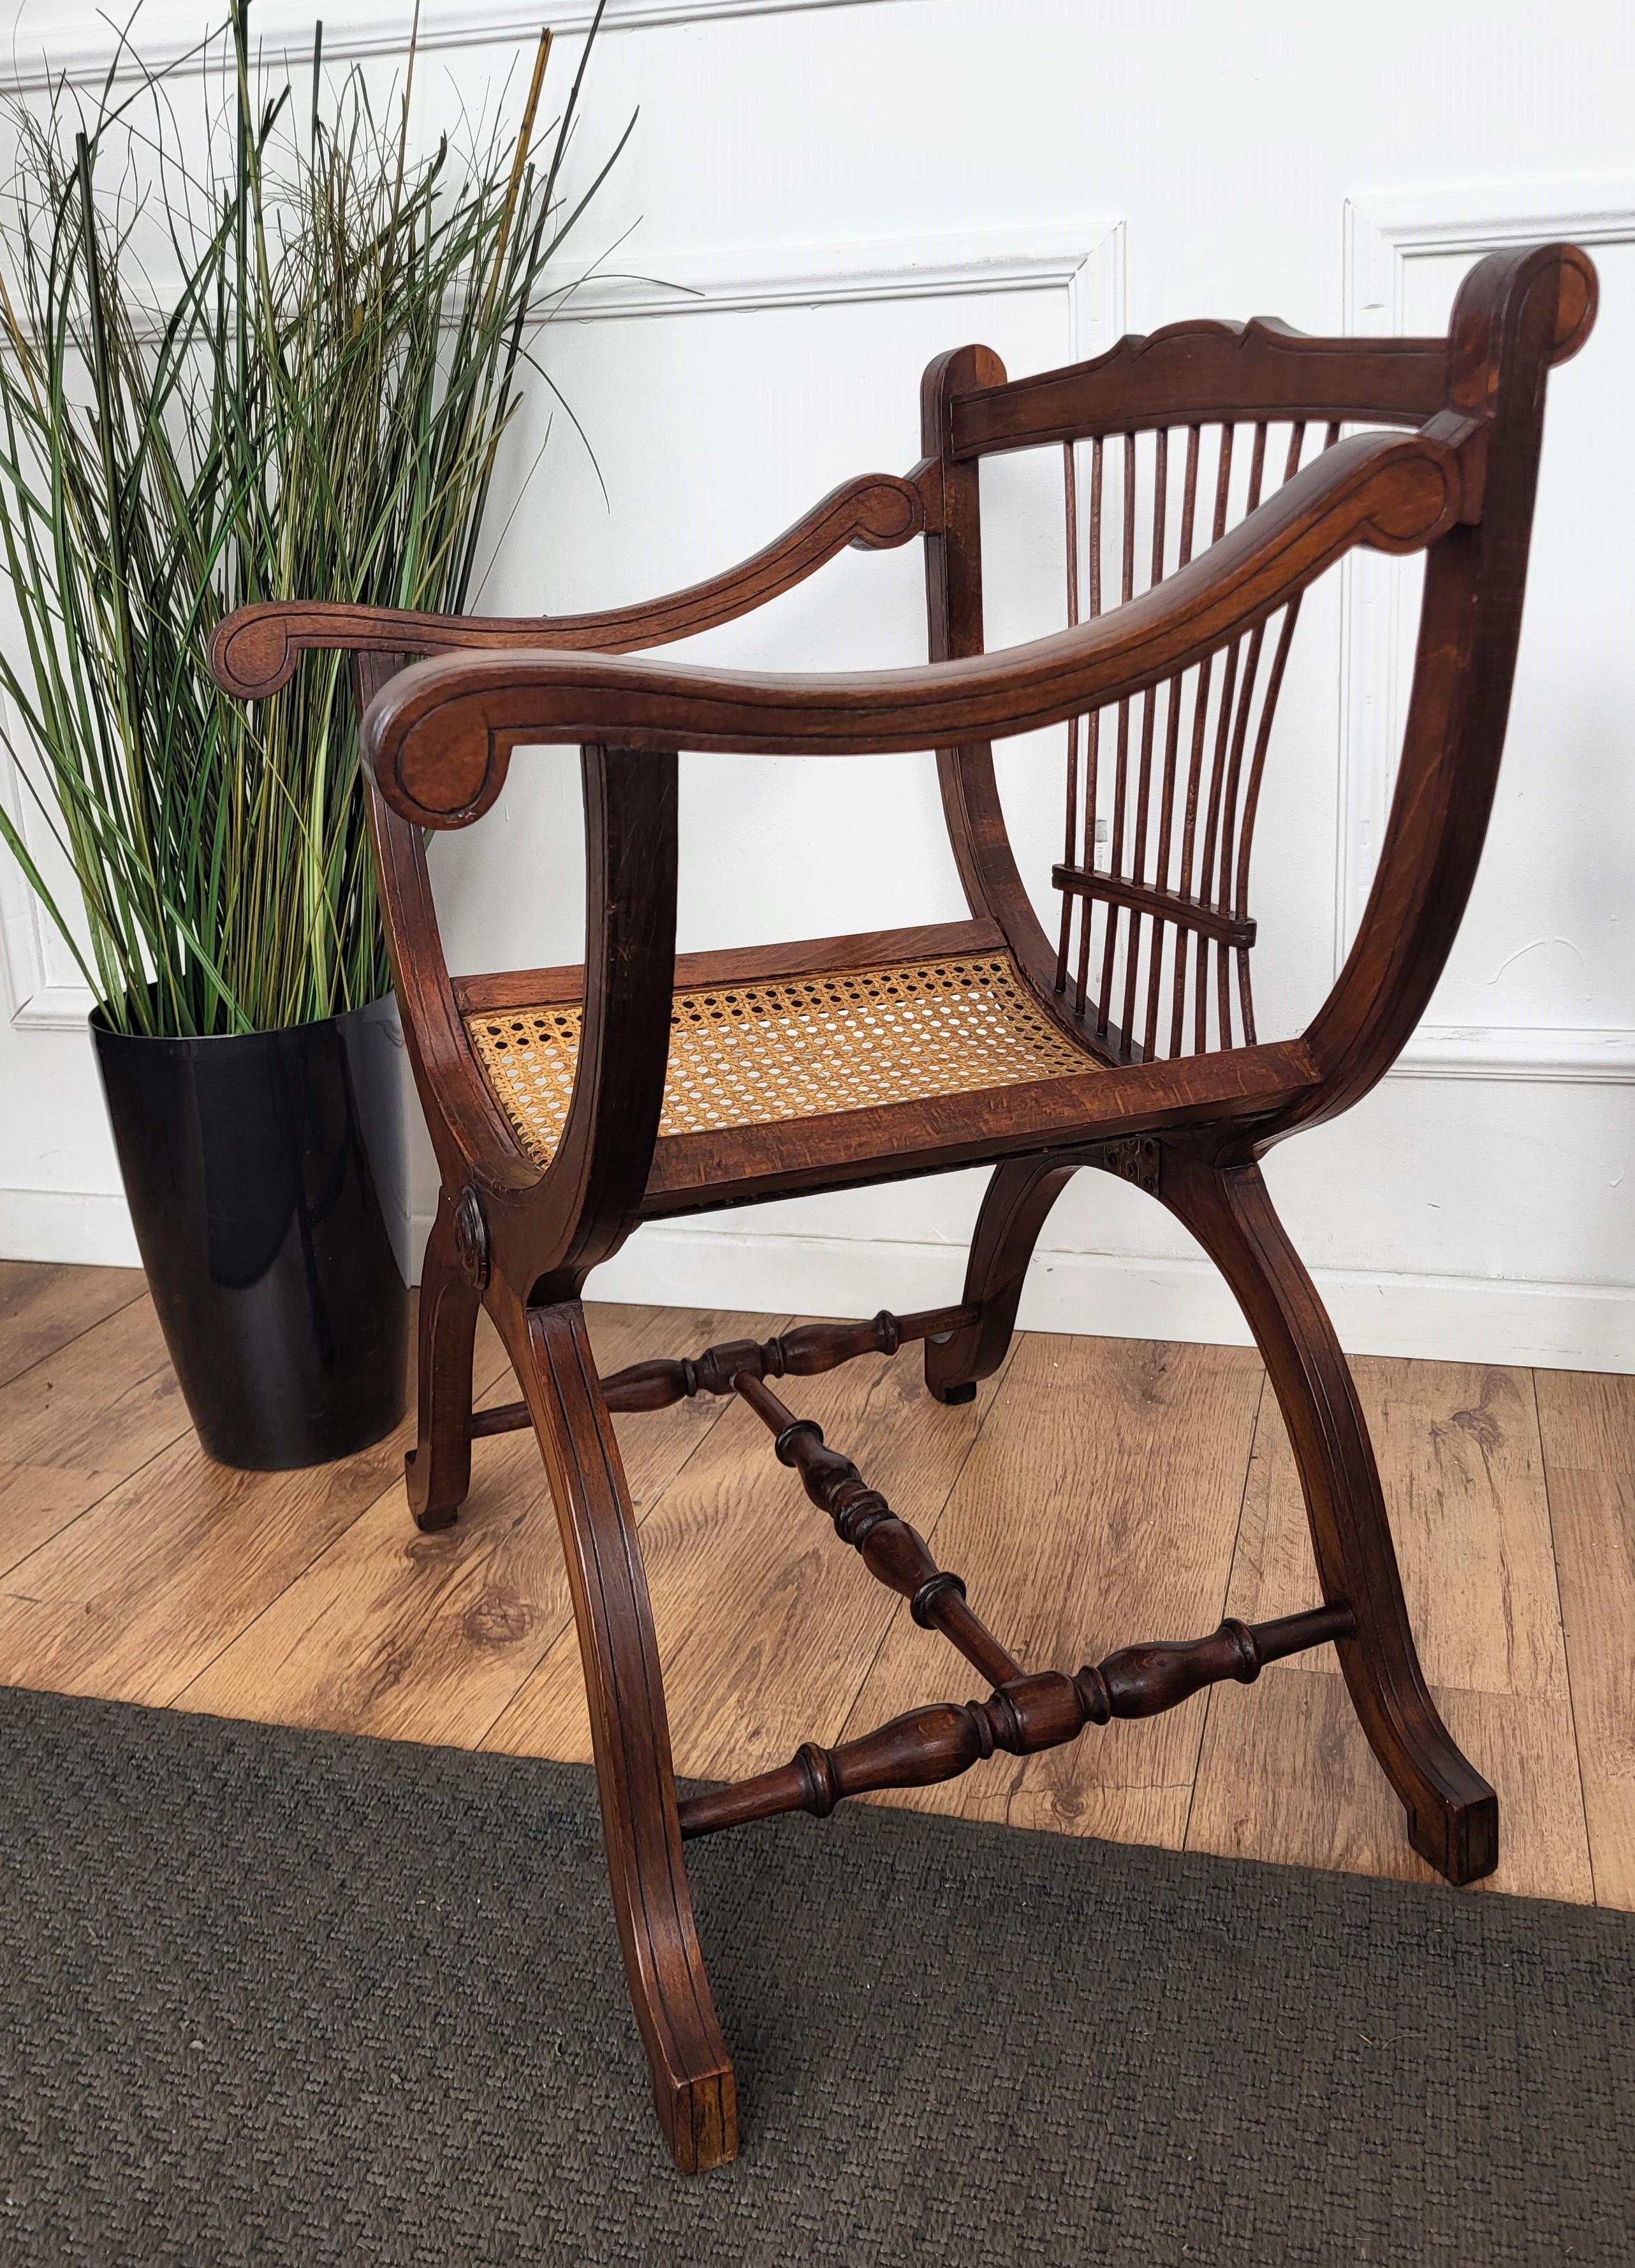 Italian Wooden Carved Caned Back Slatted Savonarola Design Arm Chairs In Good Condition For Sale In Carimate, Como